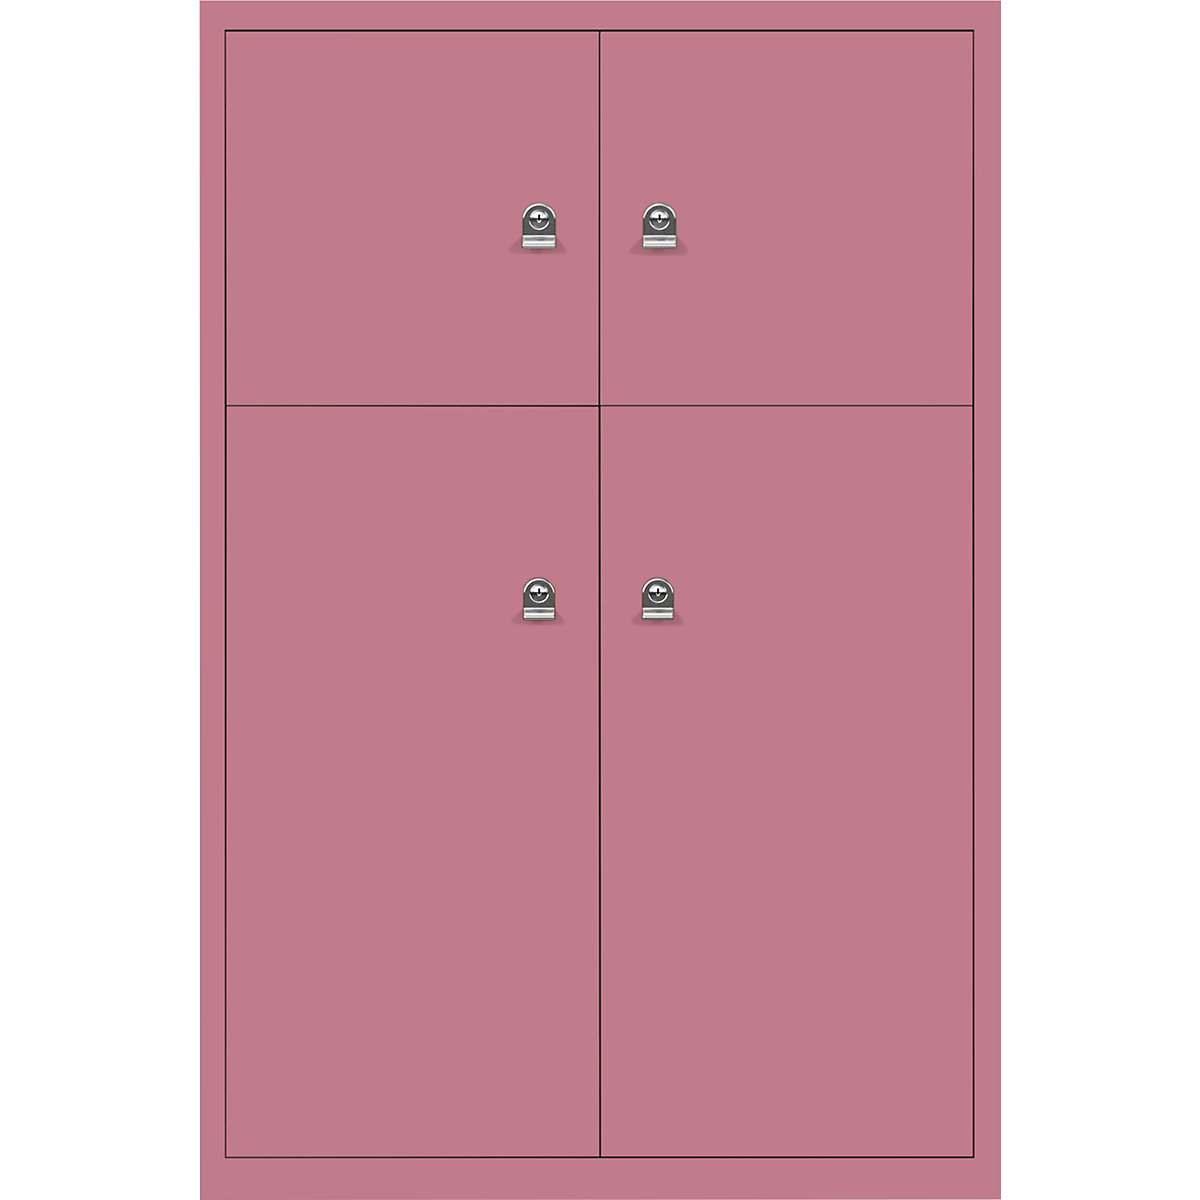 BISLEY – LateralFile™ lodge, with 4 lockable compartments, height 2 x 375 mm, 2 x 755 mm, pink